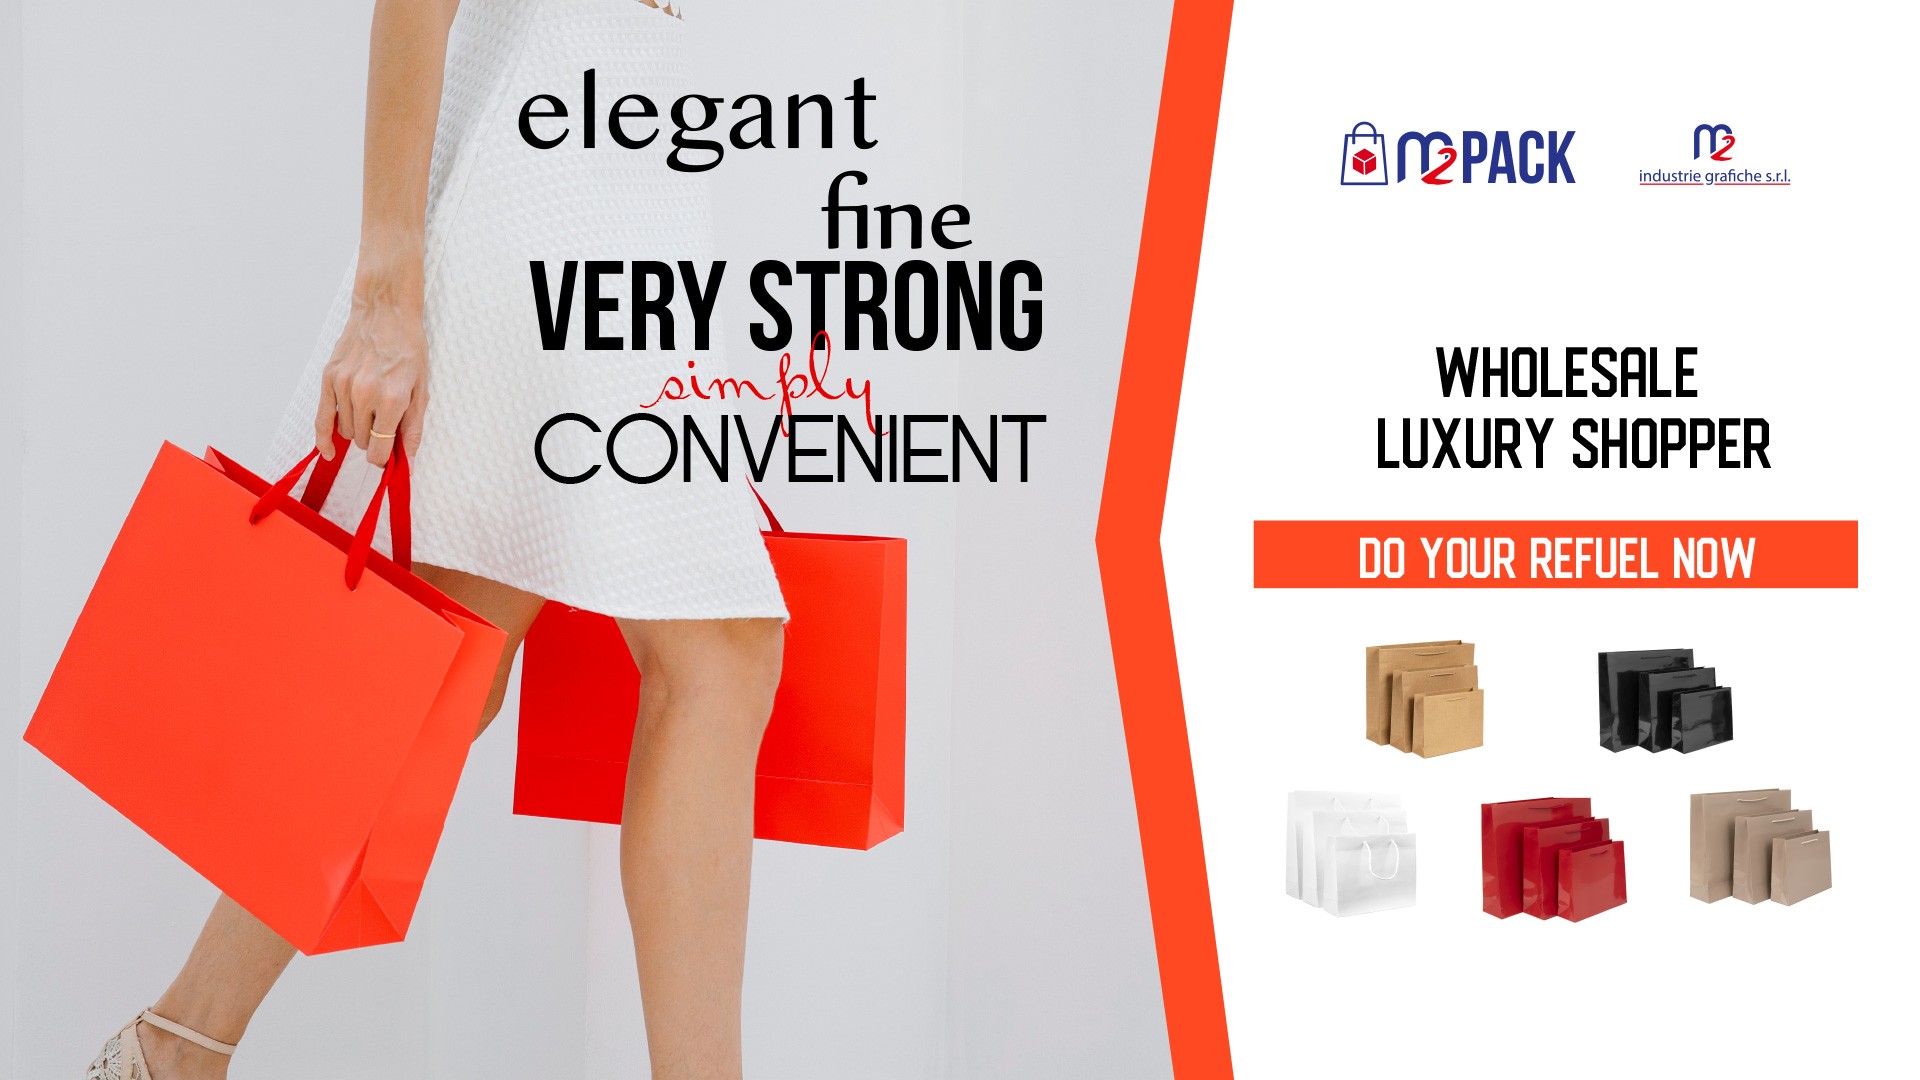 LUXURY PAPER BAGS • ELEGANT • VERY STRONG • CONVENIENT